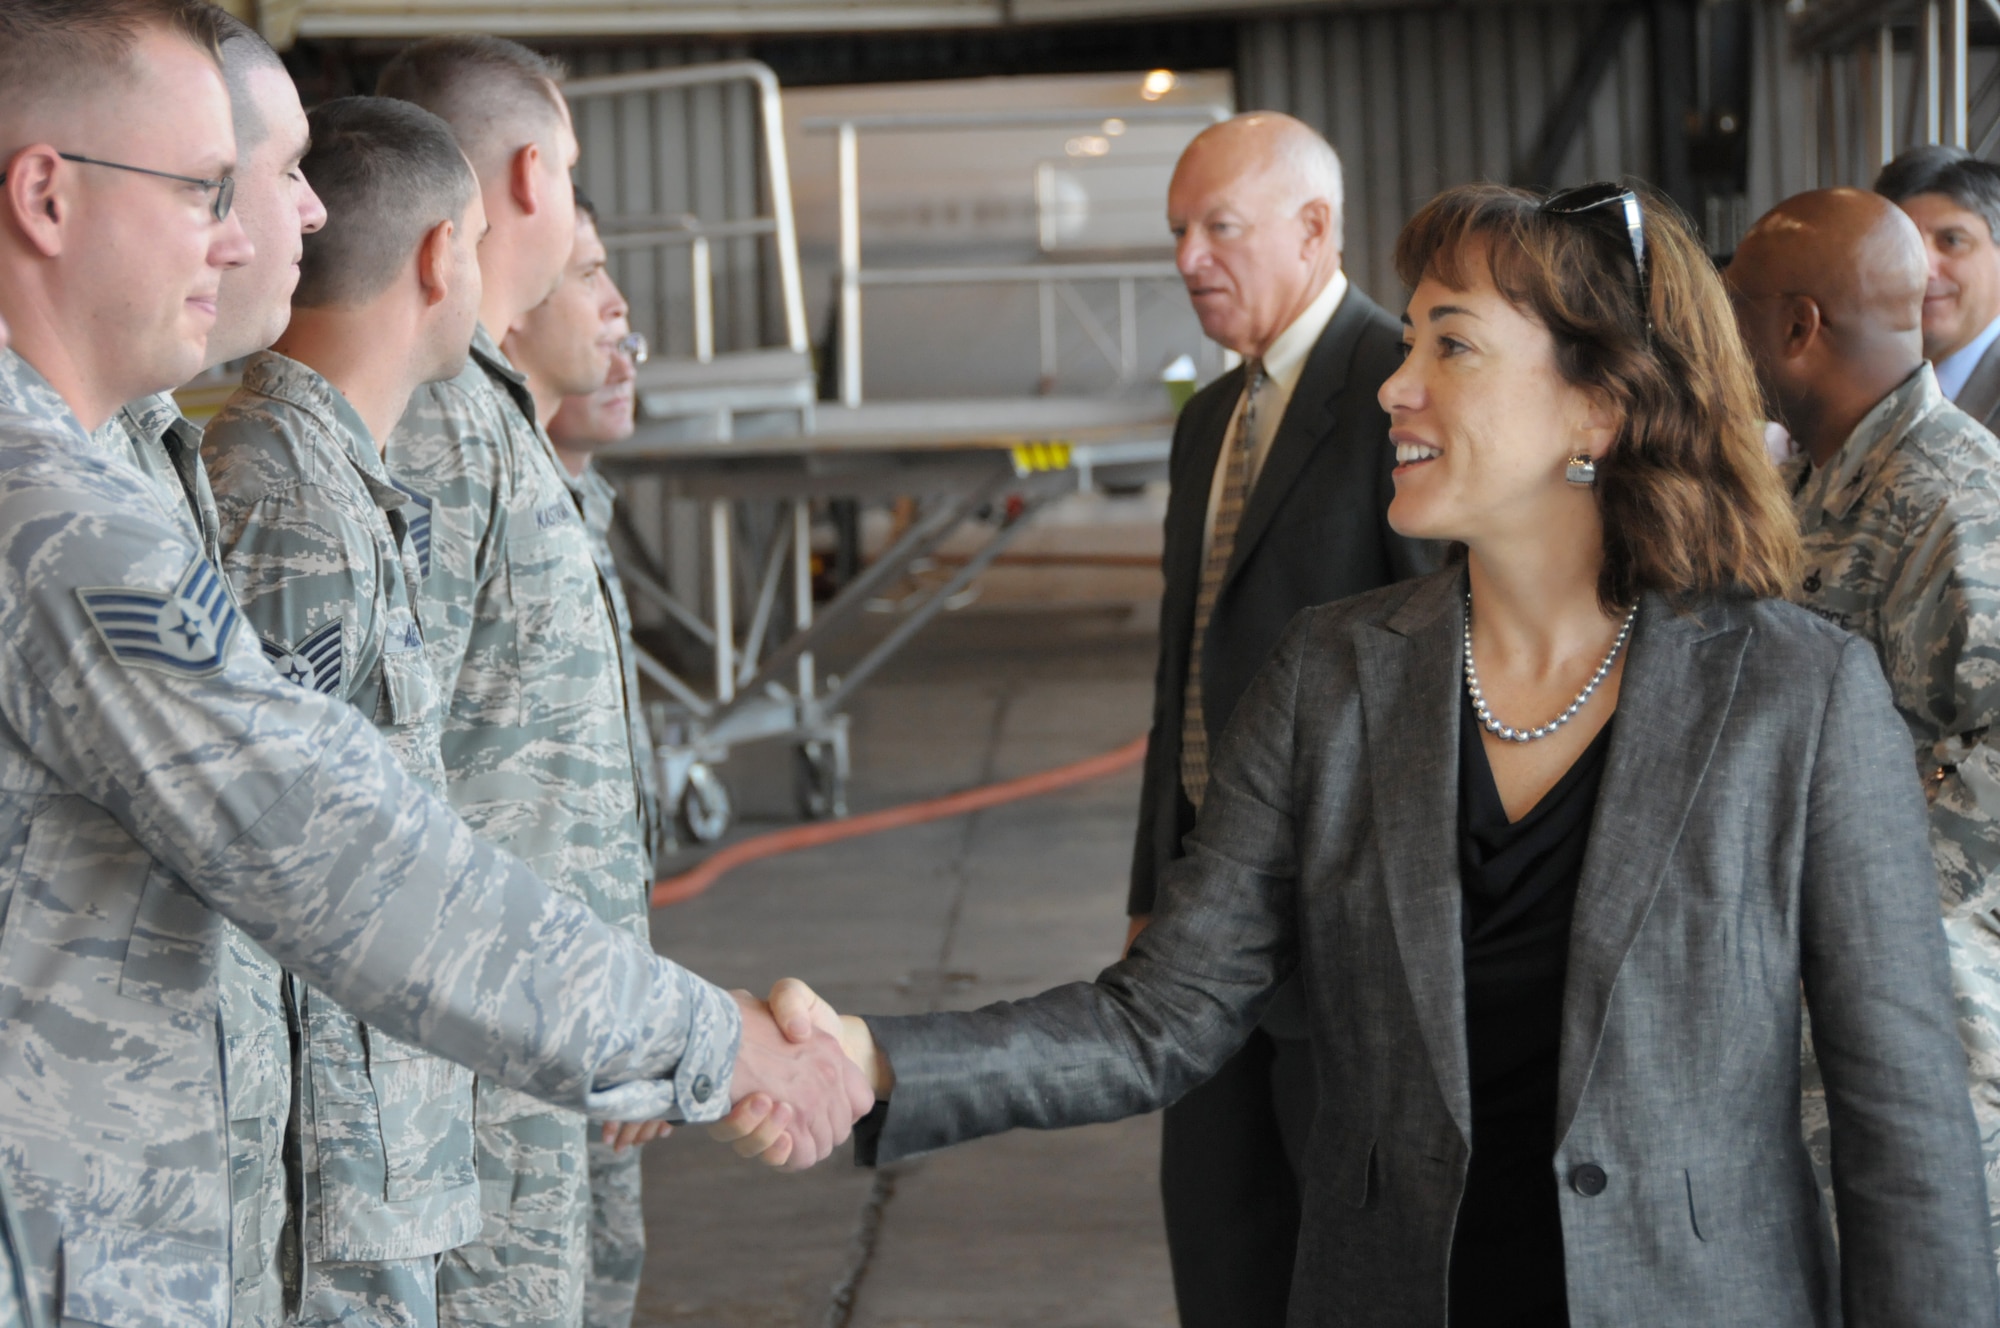 Dr. Janine Davidson, a member of the National Commission on the Structure of the Air Force, shakes hands with Tinker Air Force Base Airmen from the 552nd Air Control Wing during a visit on August 20. The commission visited parts of Tinker and held a public hearing during their trip to Oklahoma. (U.S. Air Force photo/Staff Sgt. Caleb Wanzer)